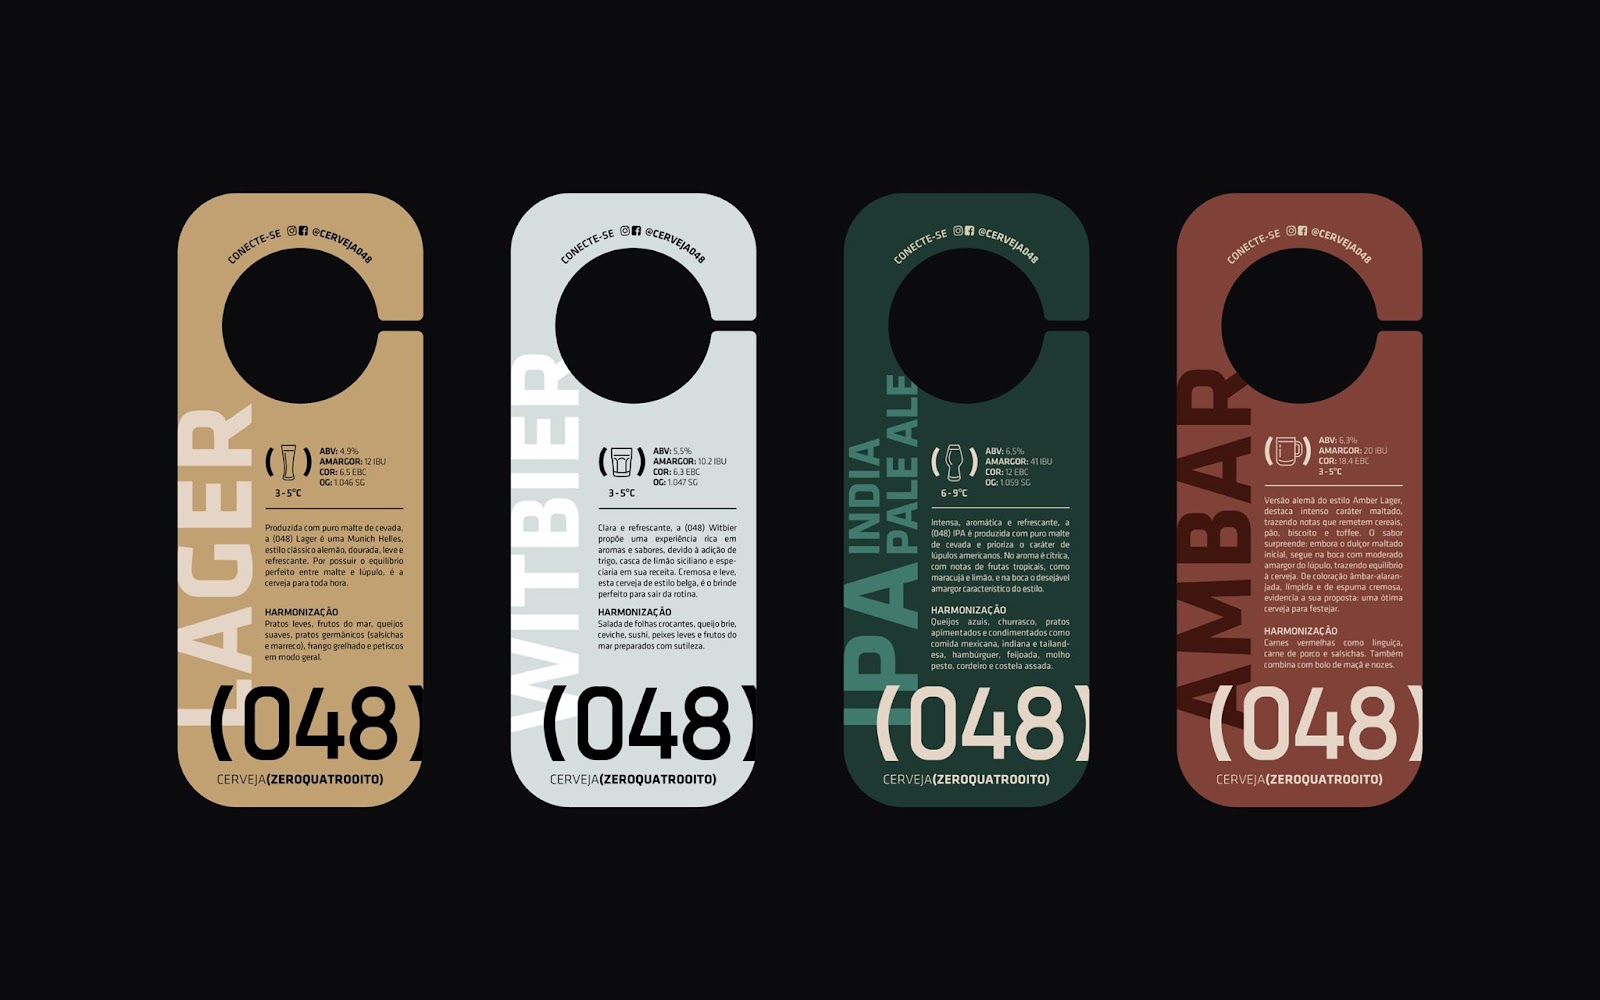 Artifact from the Brewing Visual Impact: Typography in Cerveja (048)'s Packaging Design article on Abduzeedo